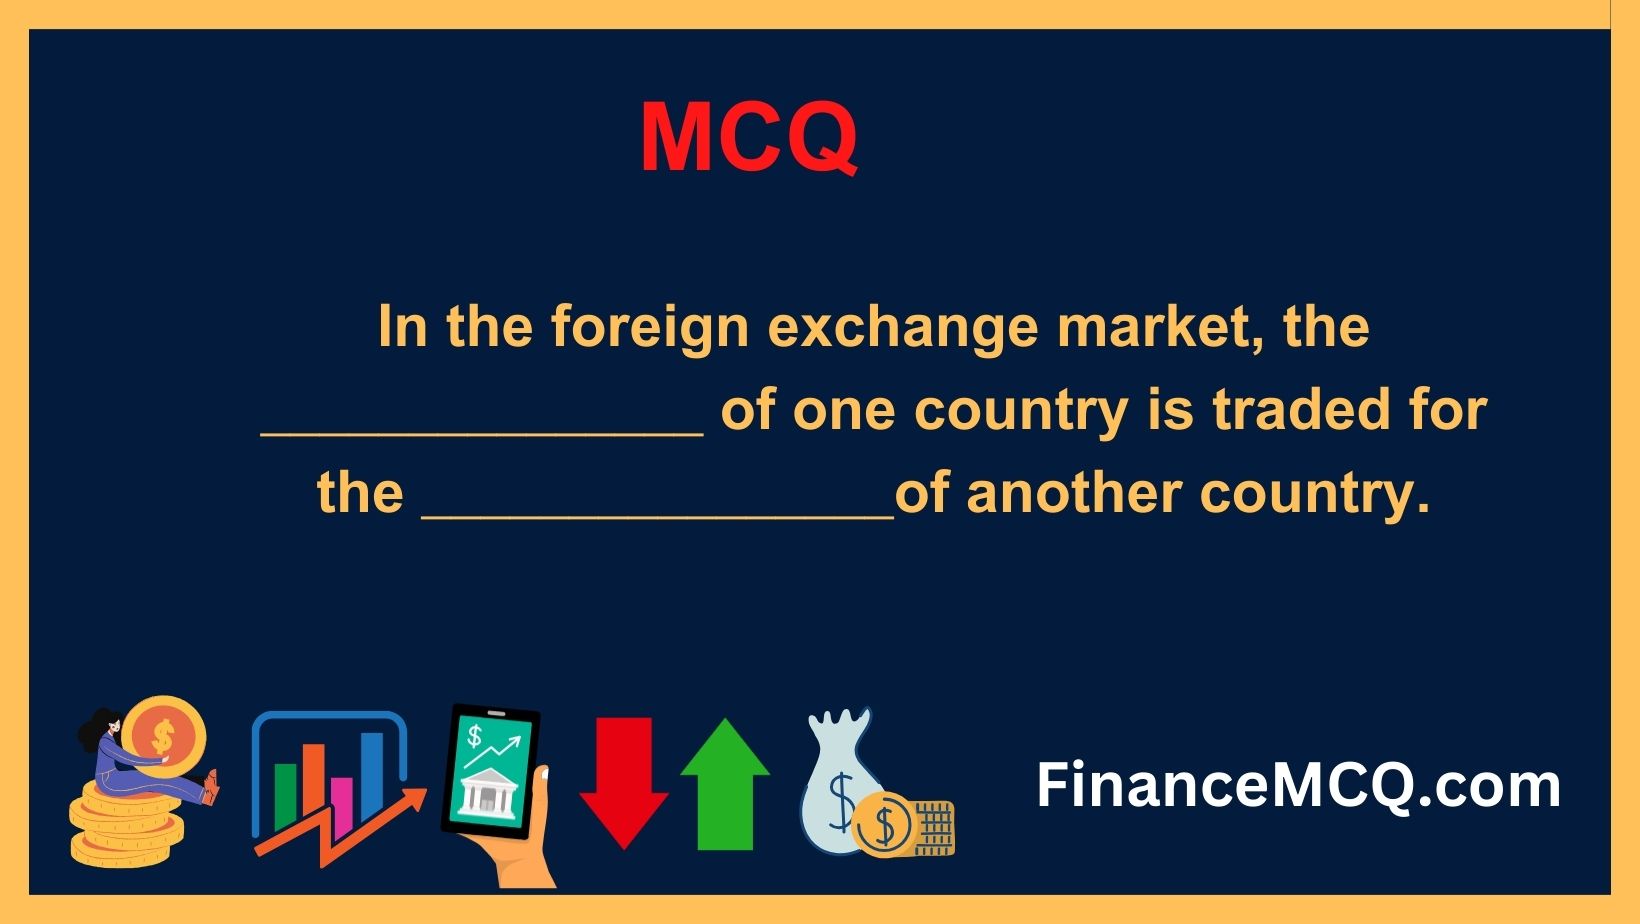 In the foreign exchange market, the _______________ of one country is traded for the ________________of another country.